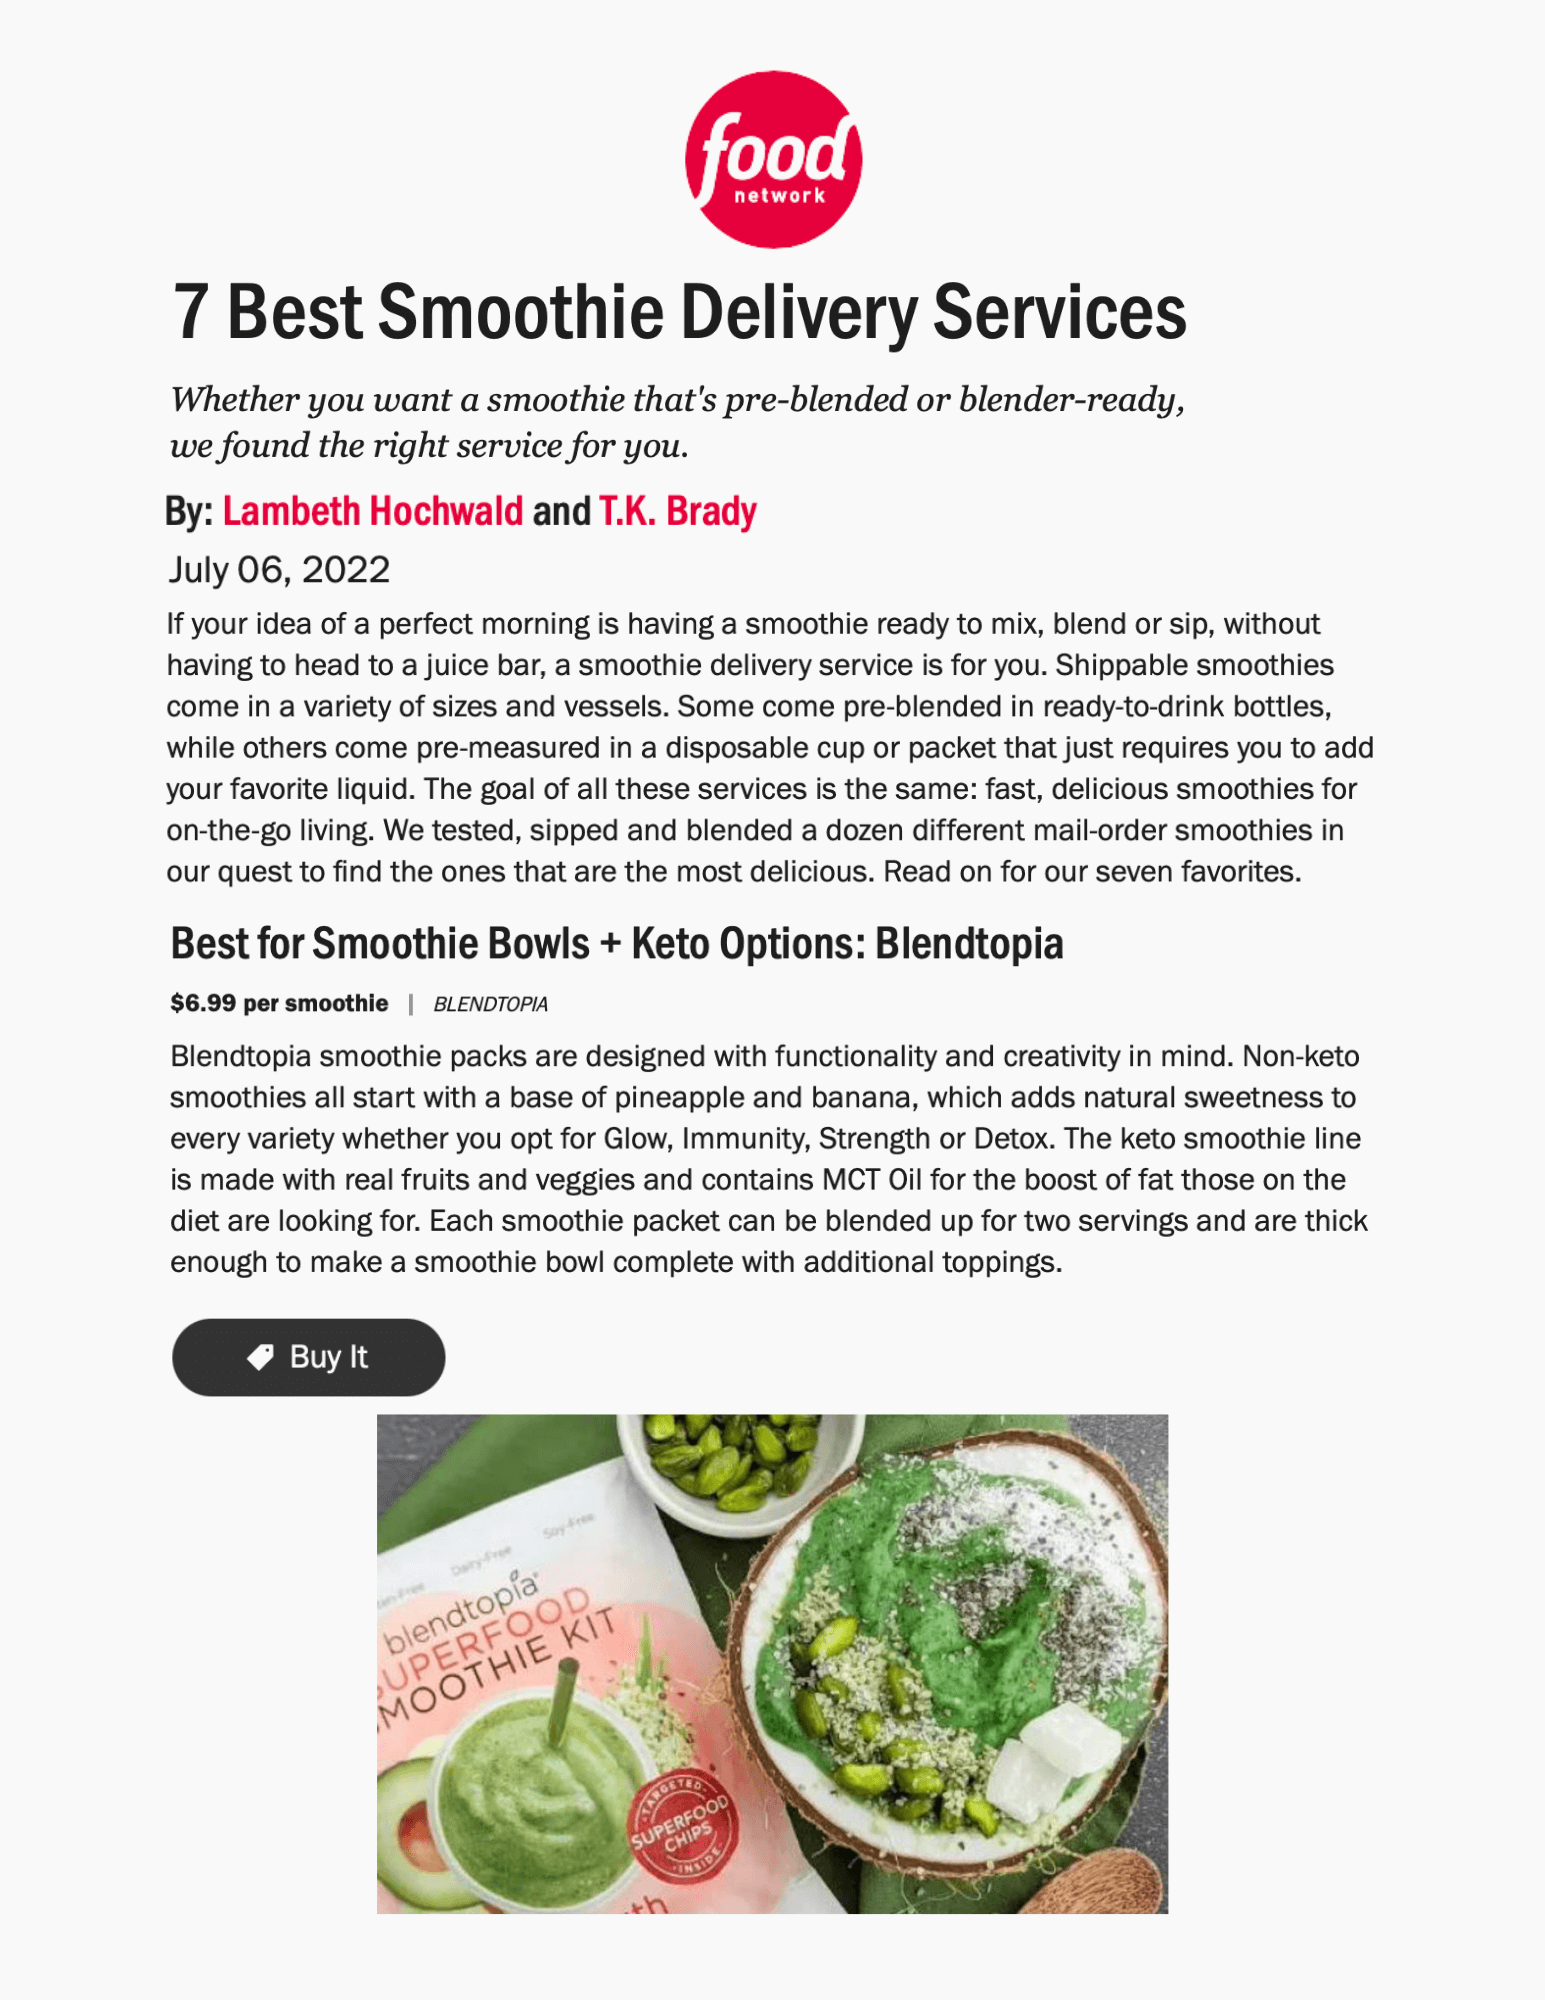 7 Best Smoothie Delivery Services
Featured Brands include:Blendtopia

Read More